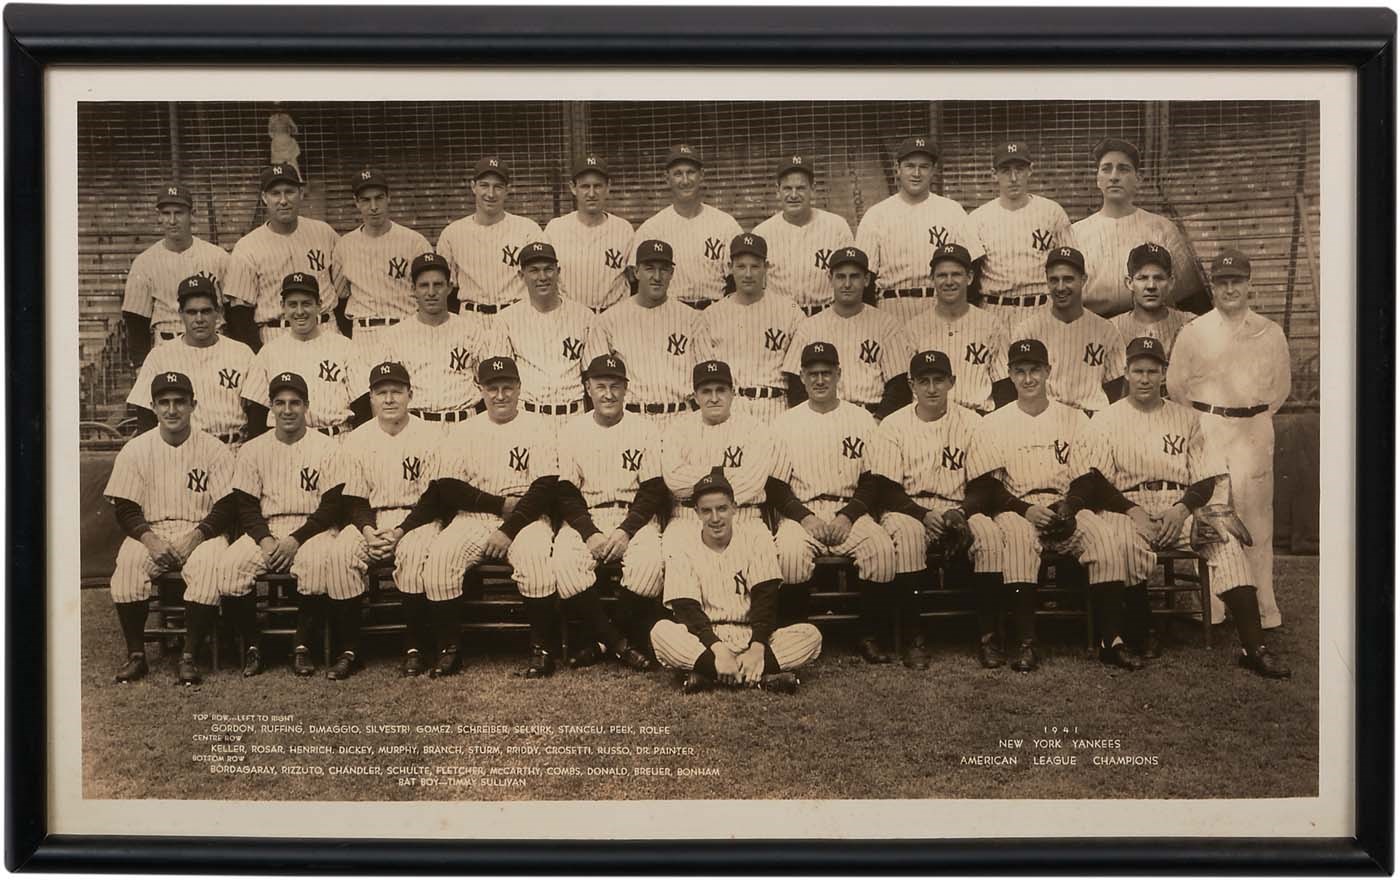 1937-50 NY Yankees Presentation Photos Given to Players and VIPs (5)